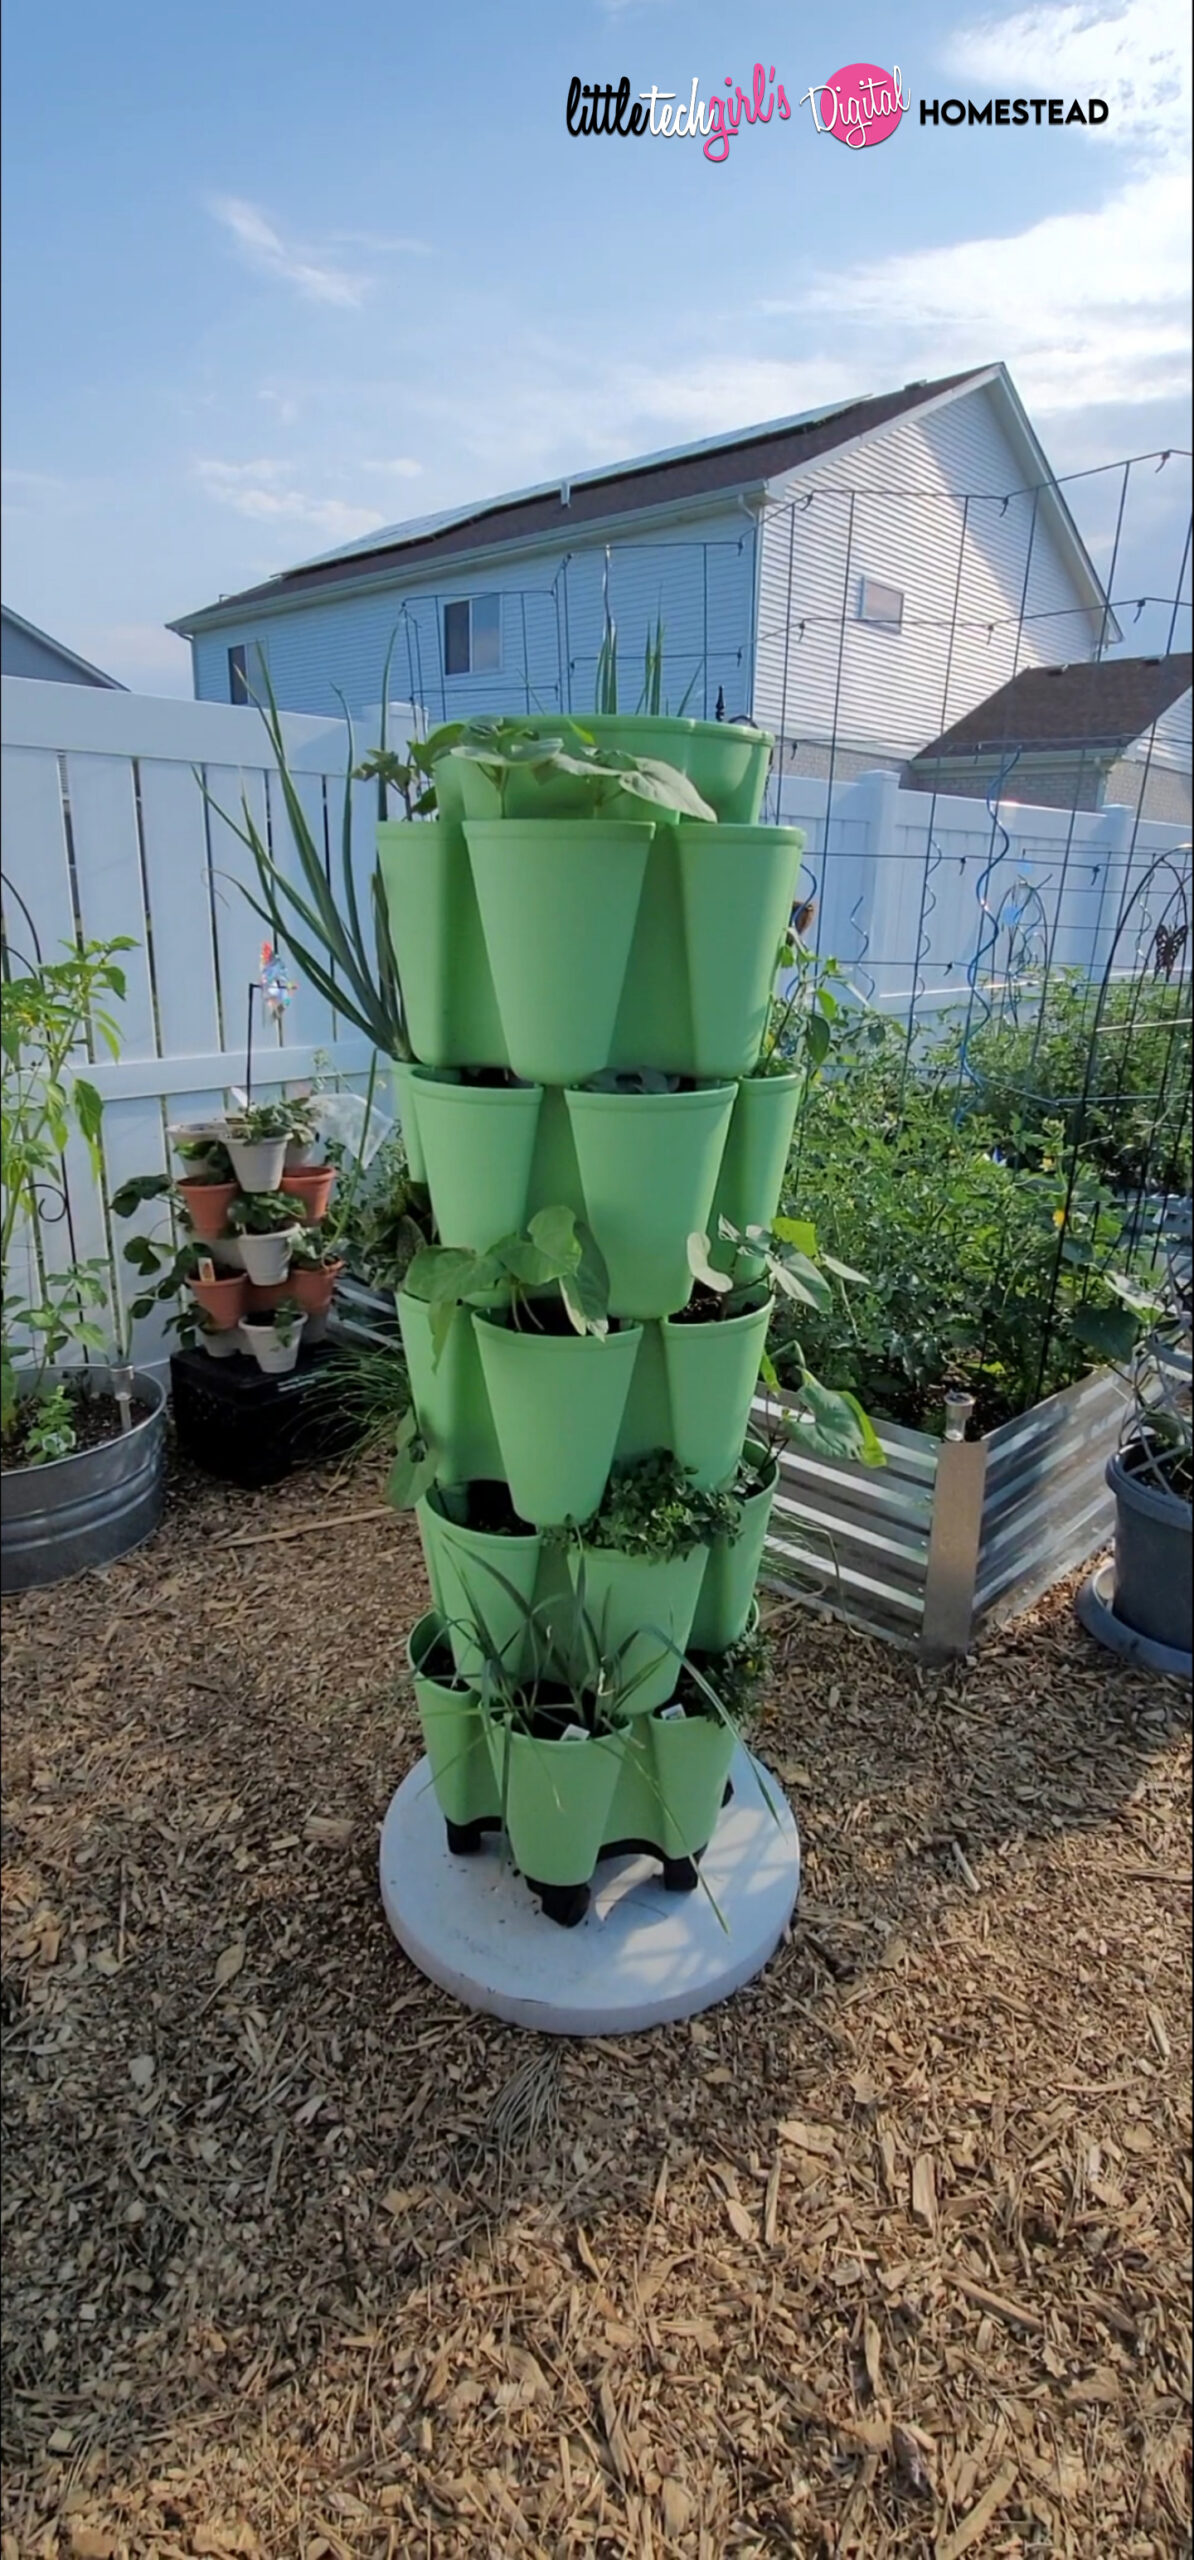 The Benefits and Care Tips for Greenstalks: Growing Greener with Vertical Gardening